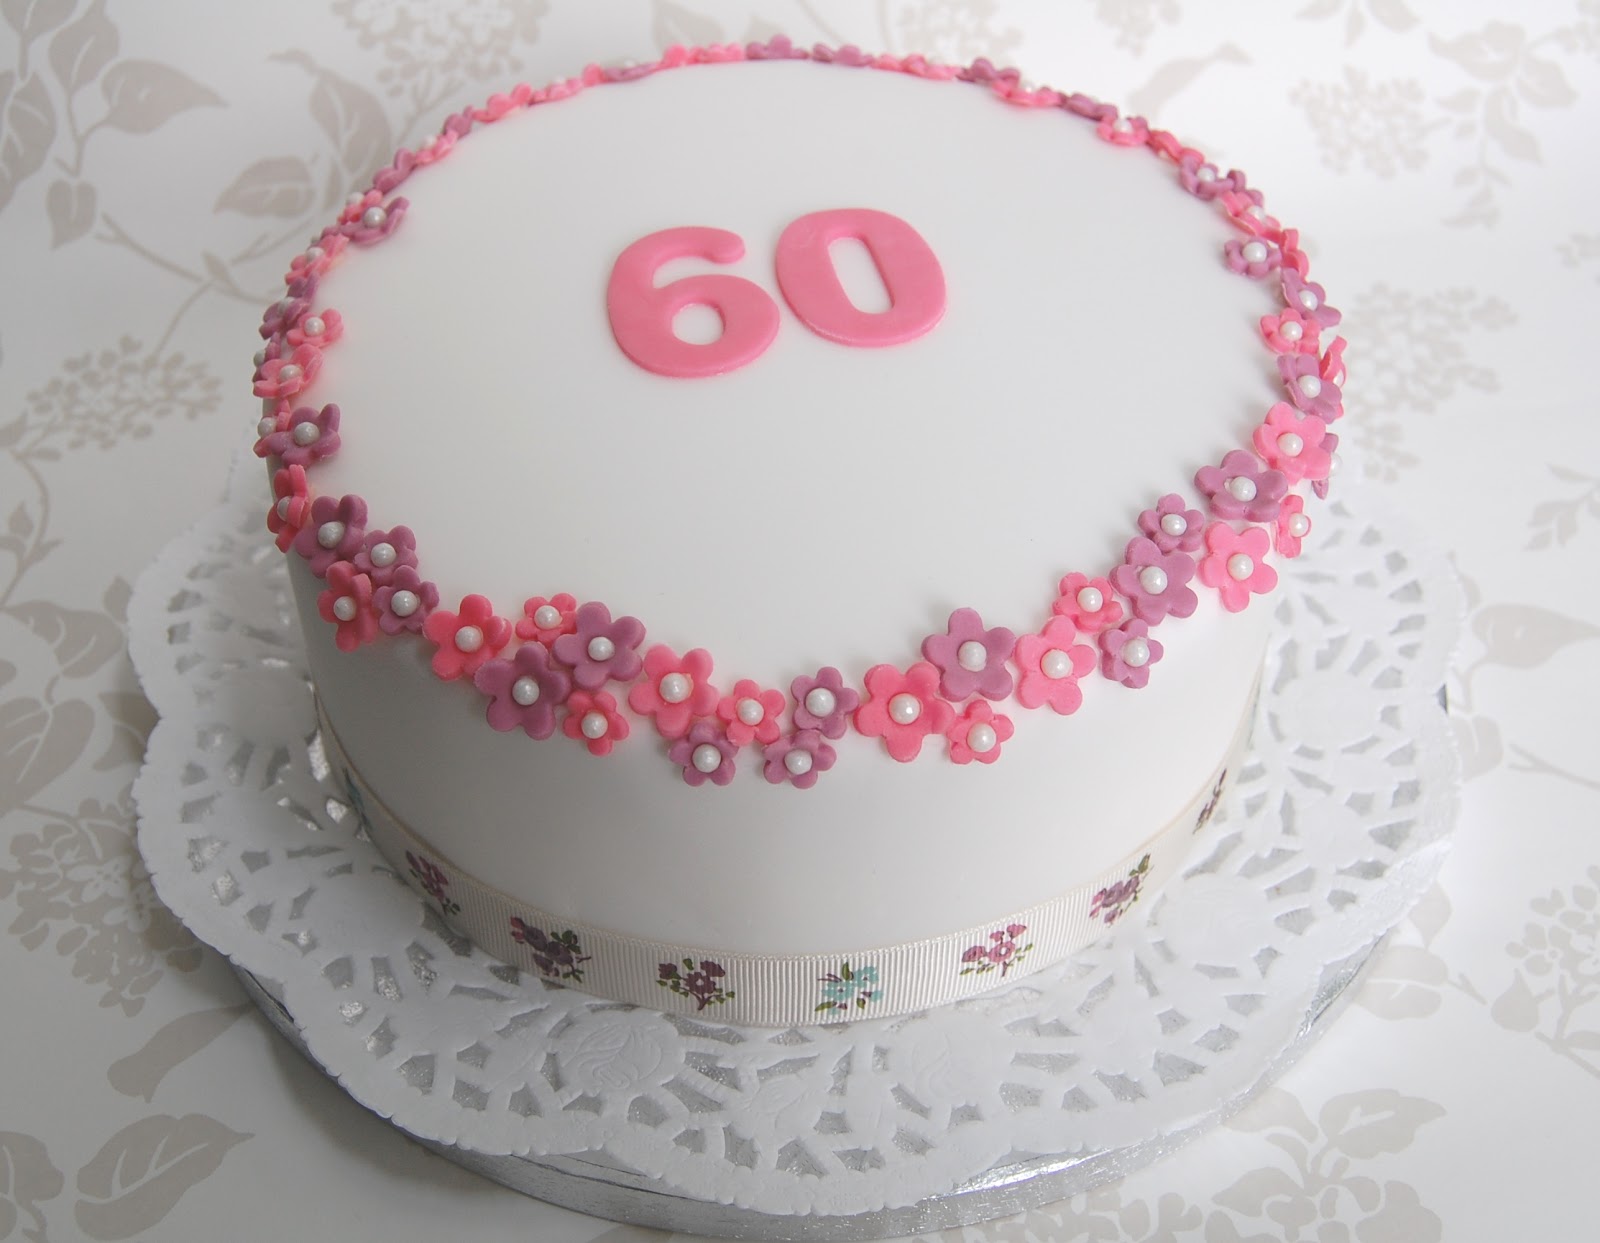 Birthday Cakes for 60 Year Olds